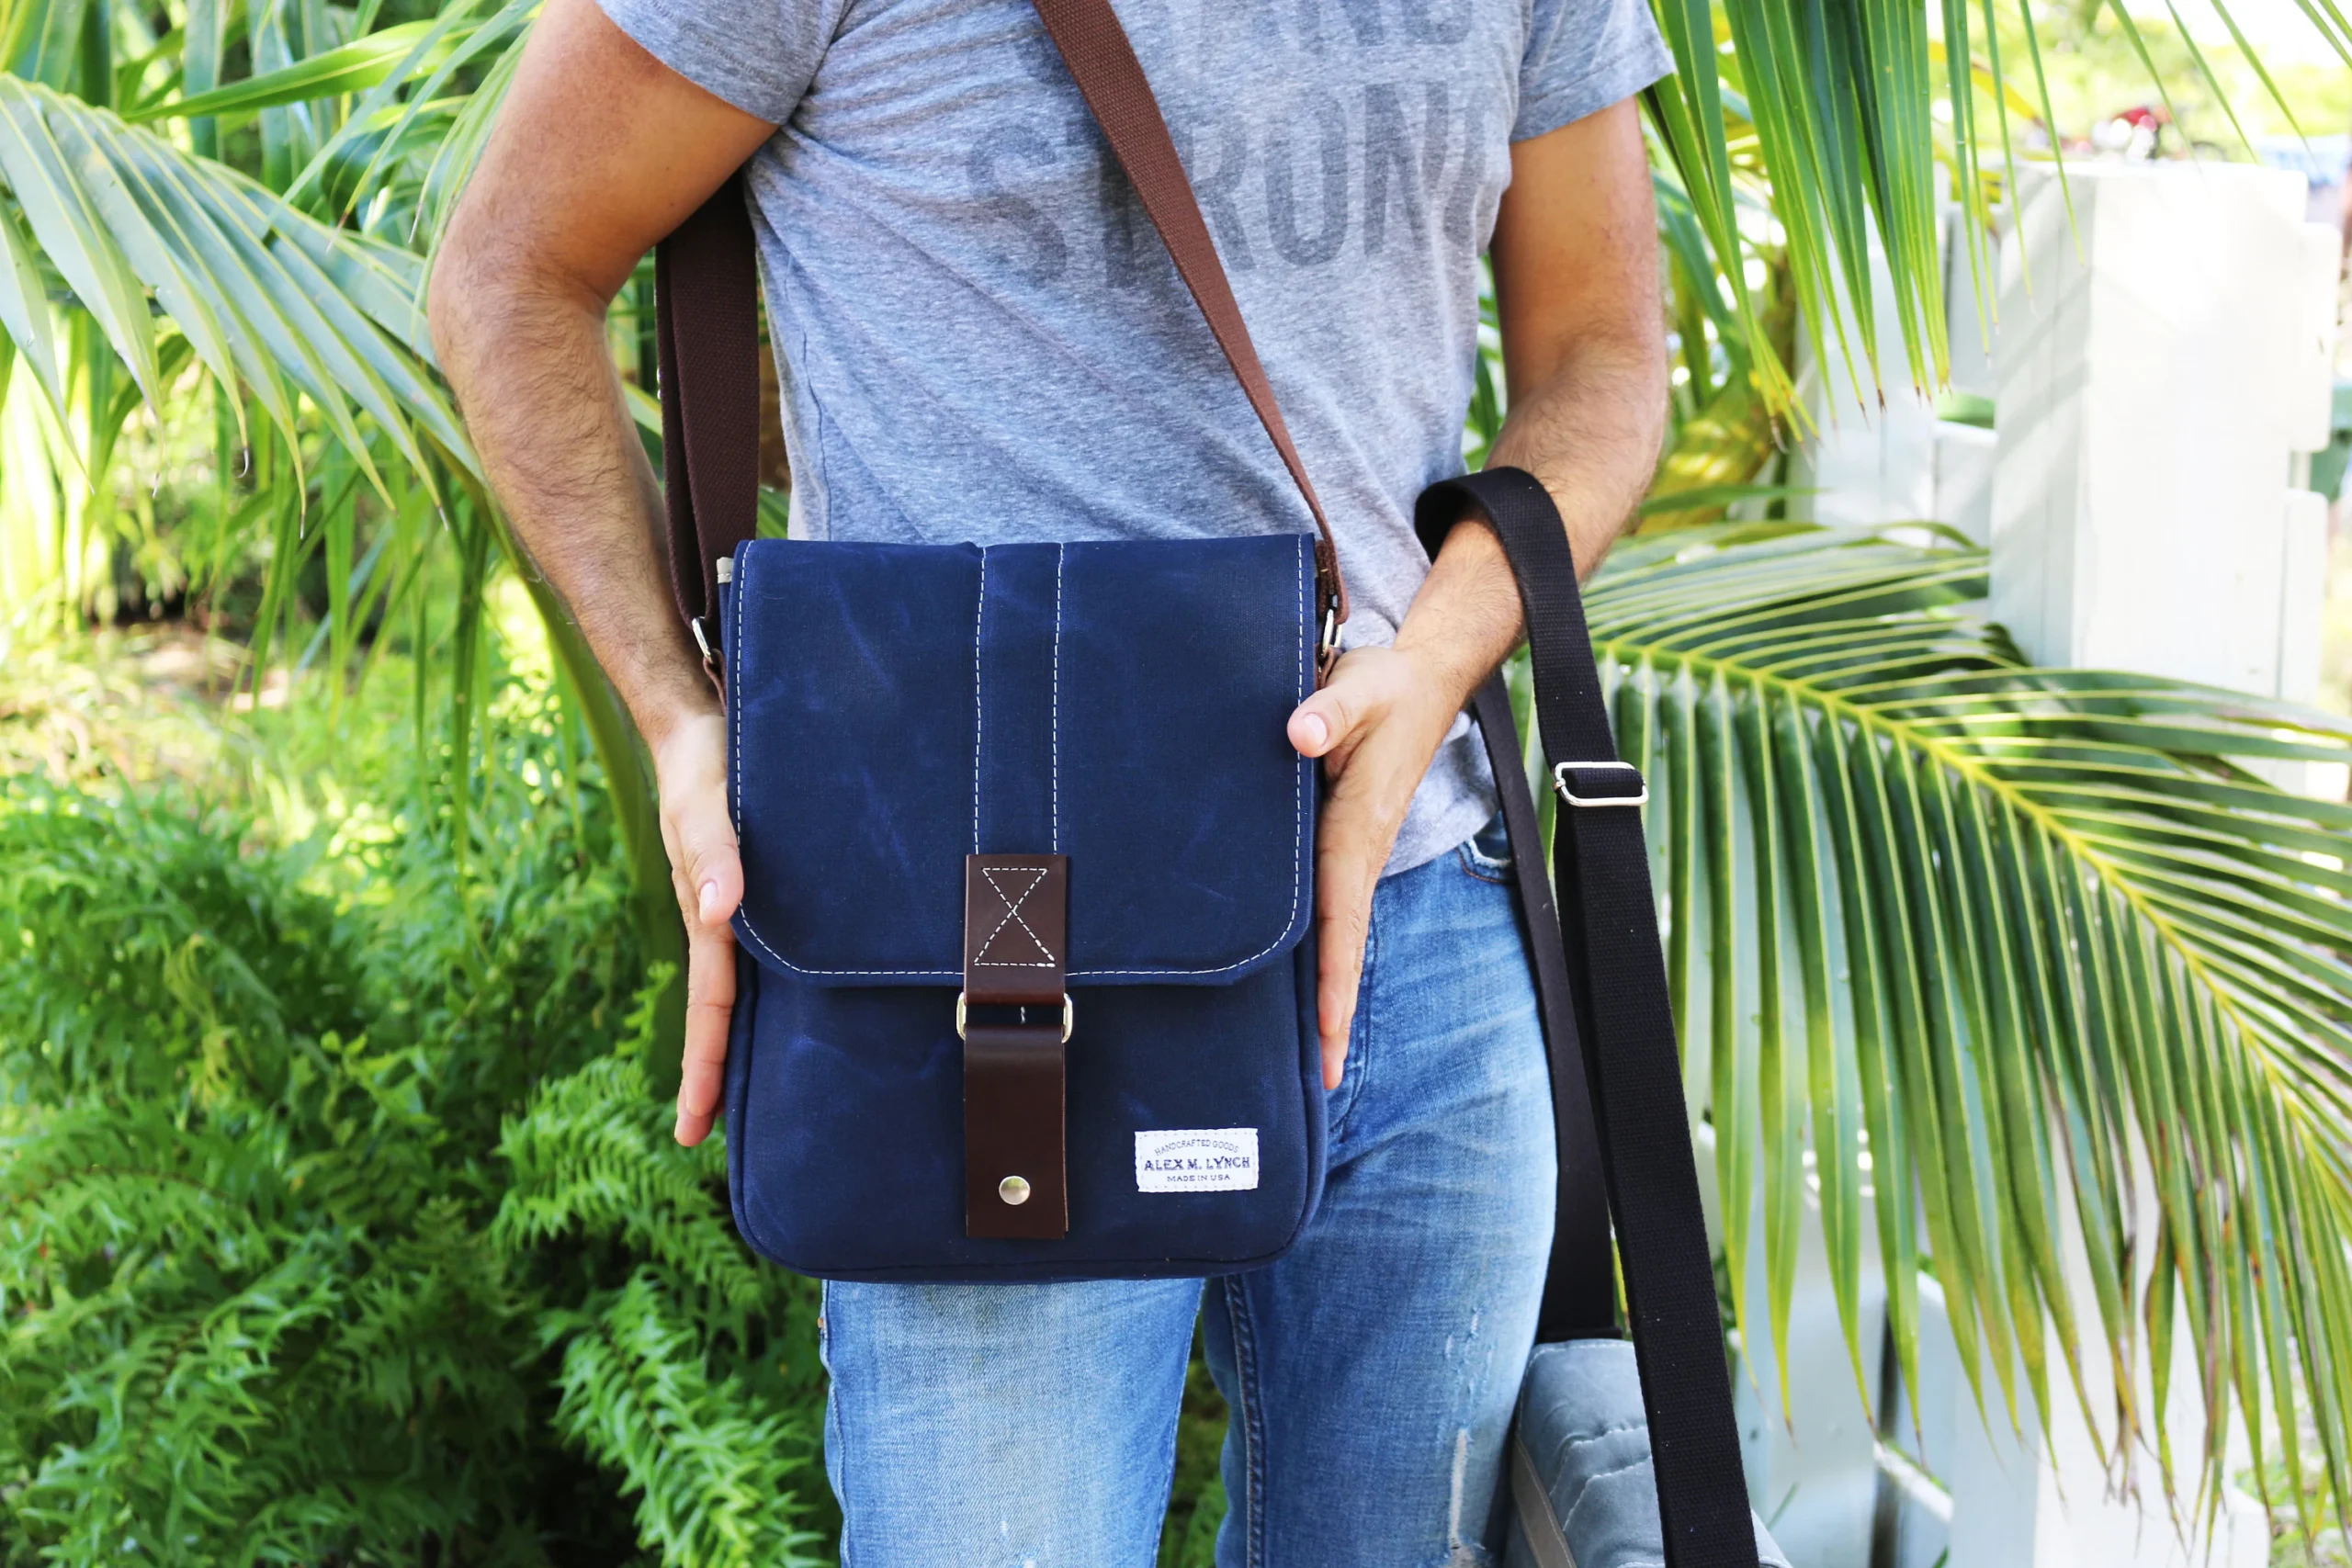 Best Vertical Messenger Bag 2023: A Review and Buying Guide